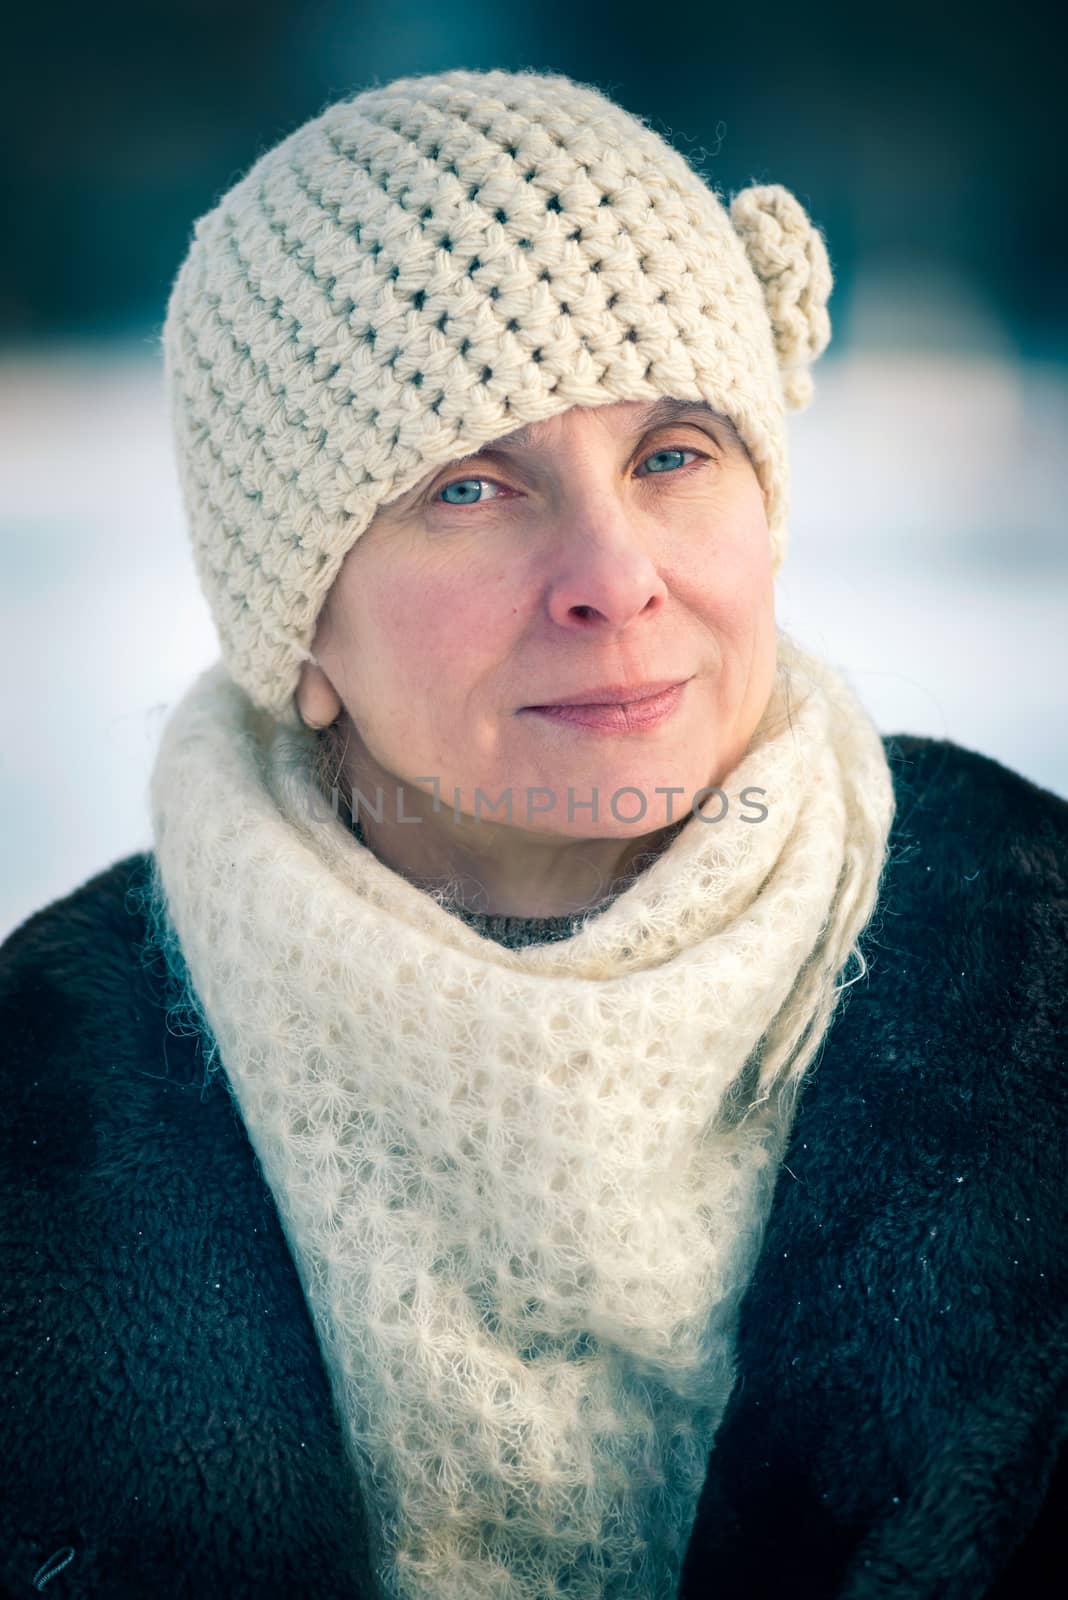 A winter portrait of a senior adult woman wearing a wool cap and a scarf, with a snow background